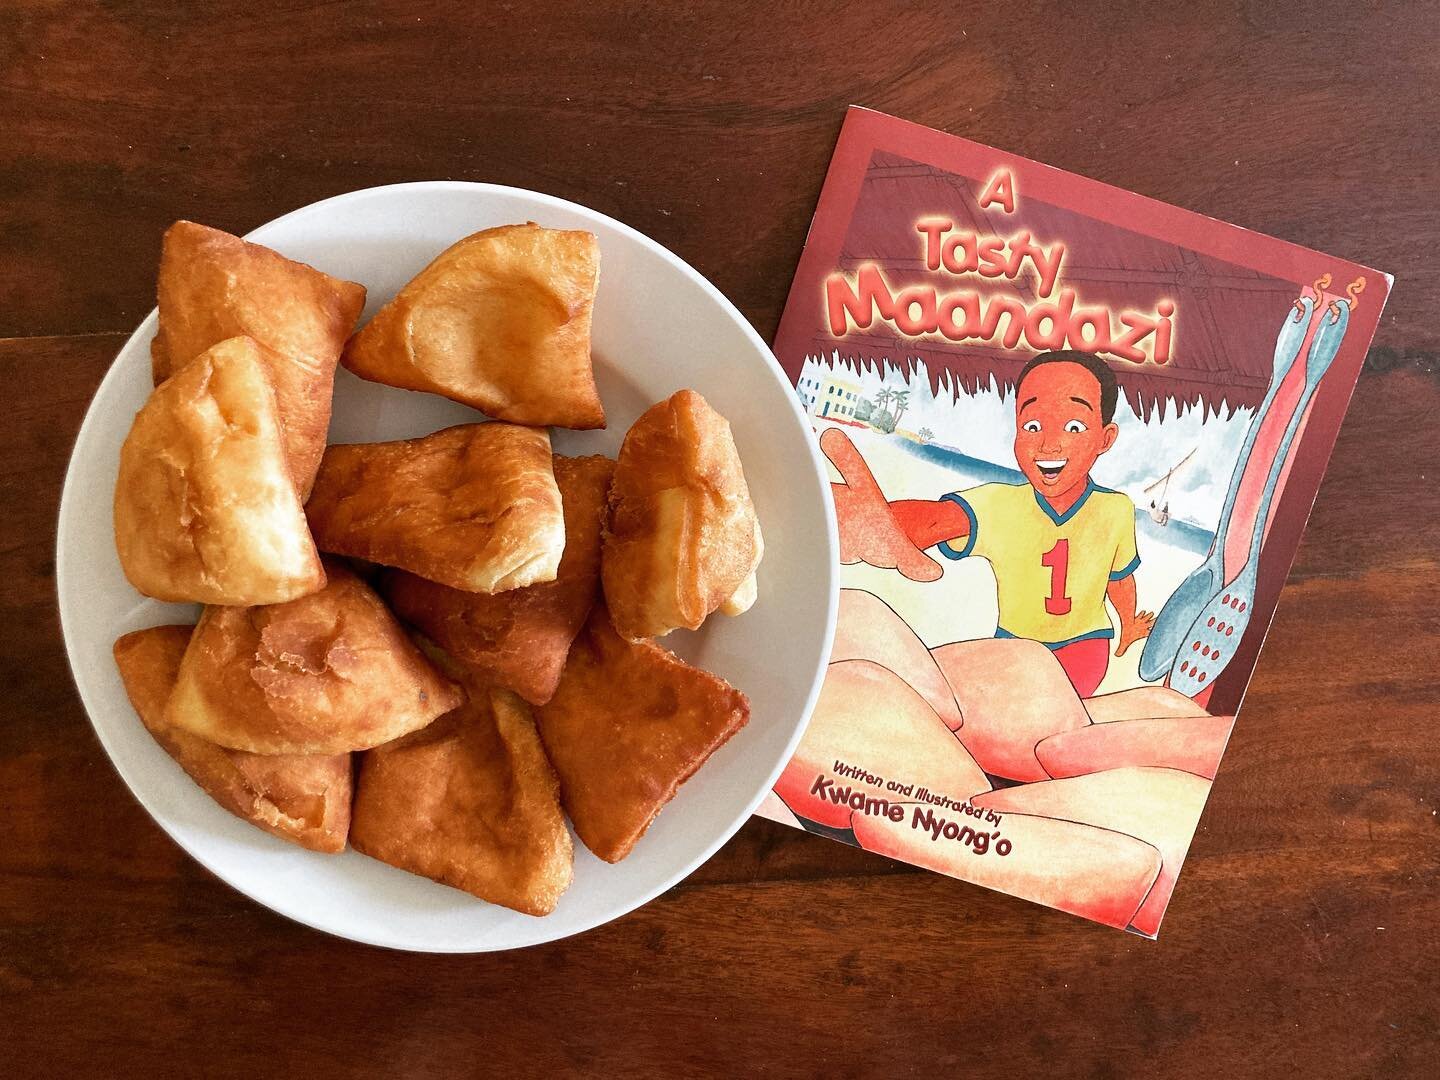 A TASTY MAANDAZI 📖

Ending our week of coast love by sharing about one of our favourite books by @kwame.nyongo 

&lsquo;A Tasty Maandazi&rsquo; is set in a village on the Kenyan coast where young enterprising Musa comes up with a plan to be able to 